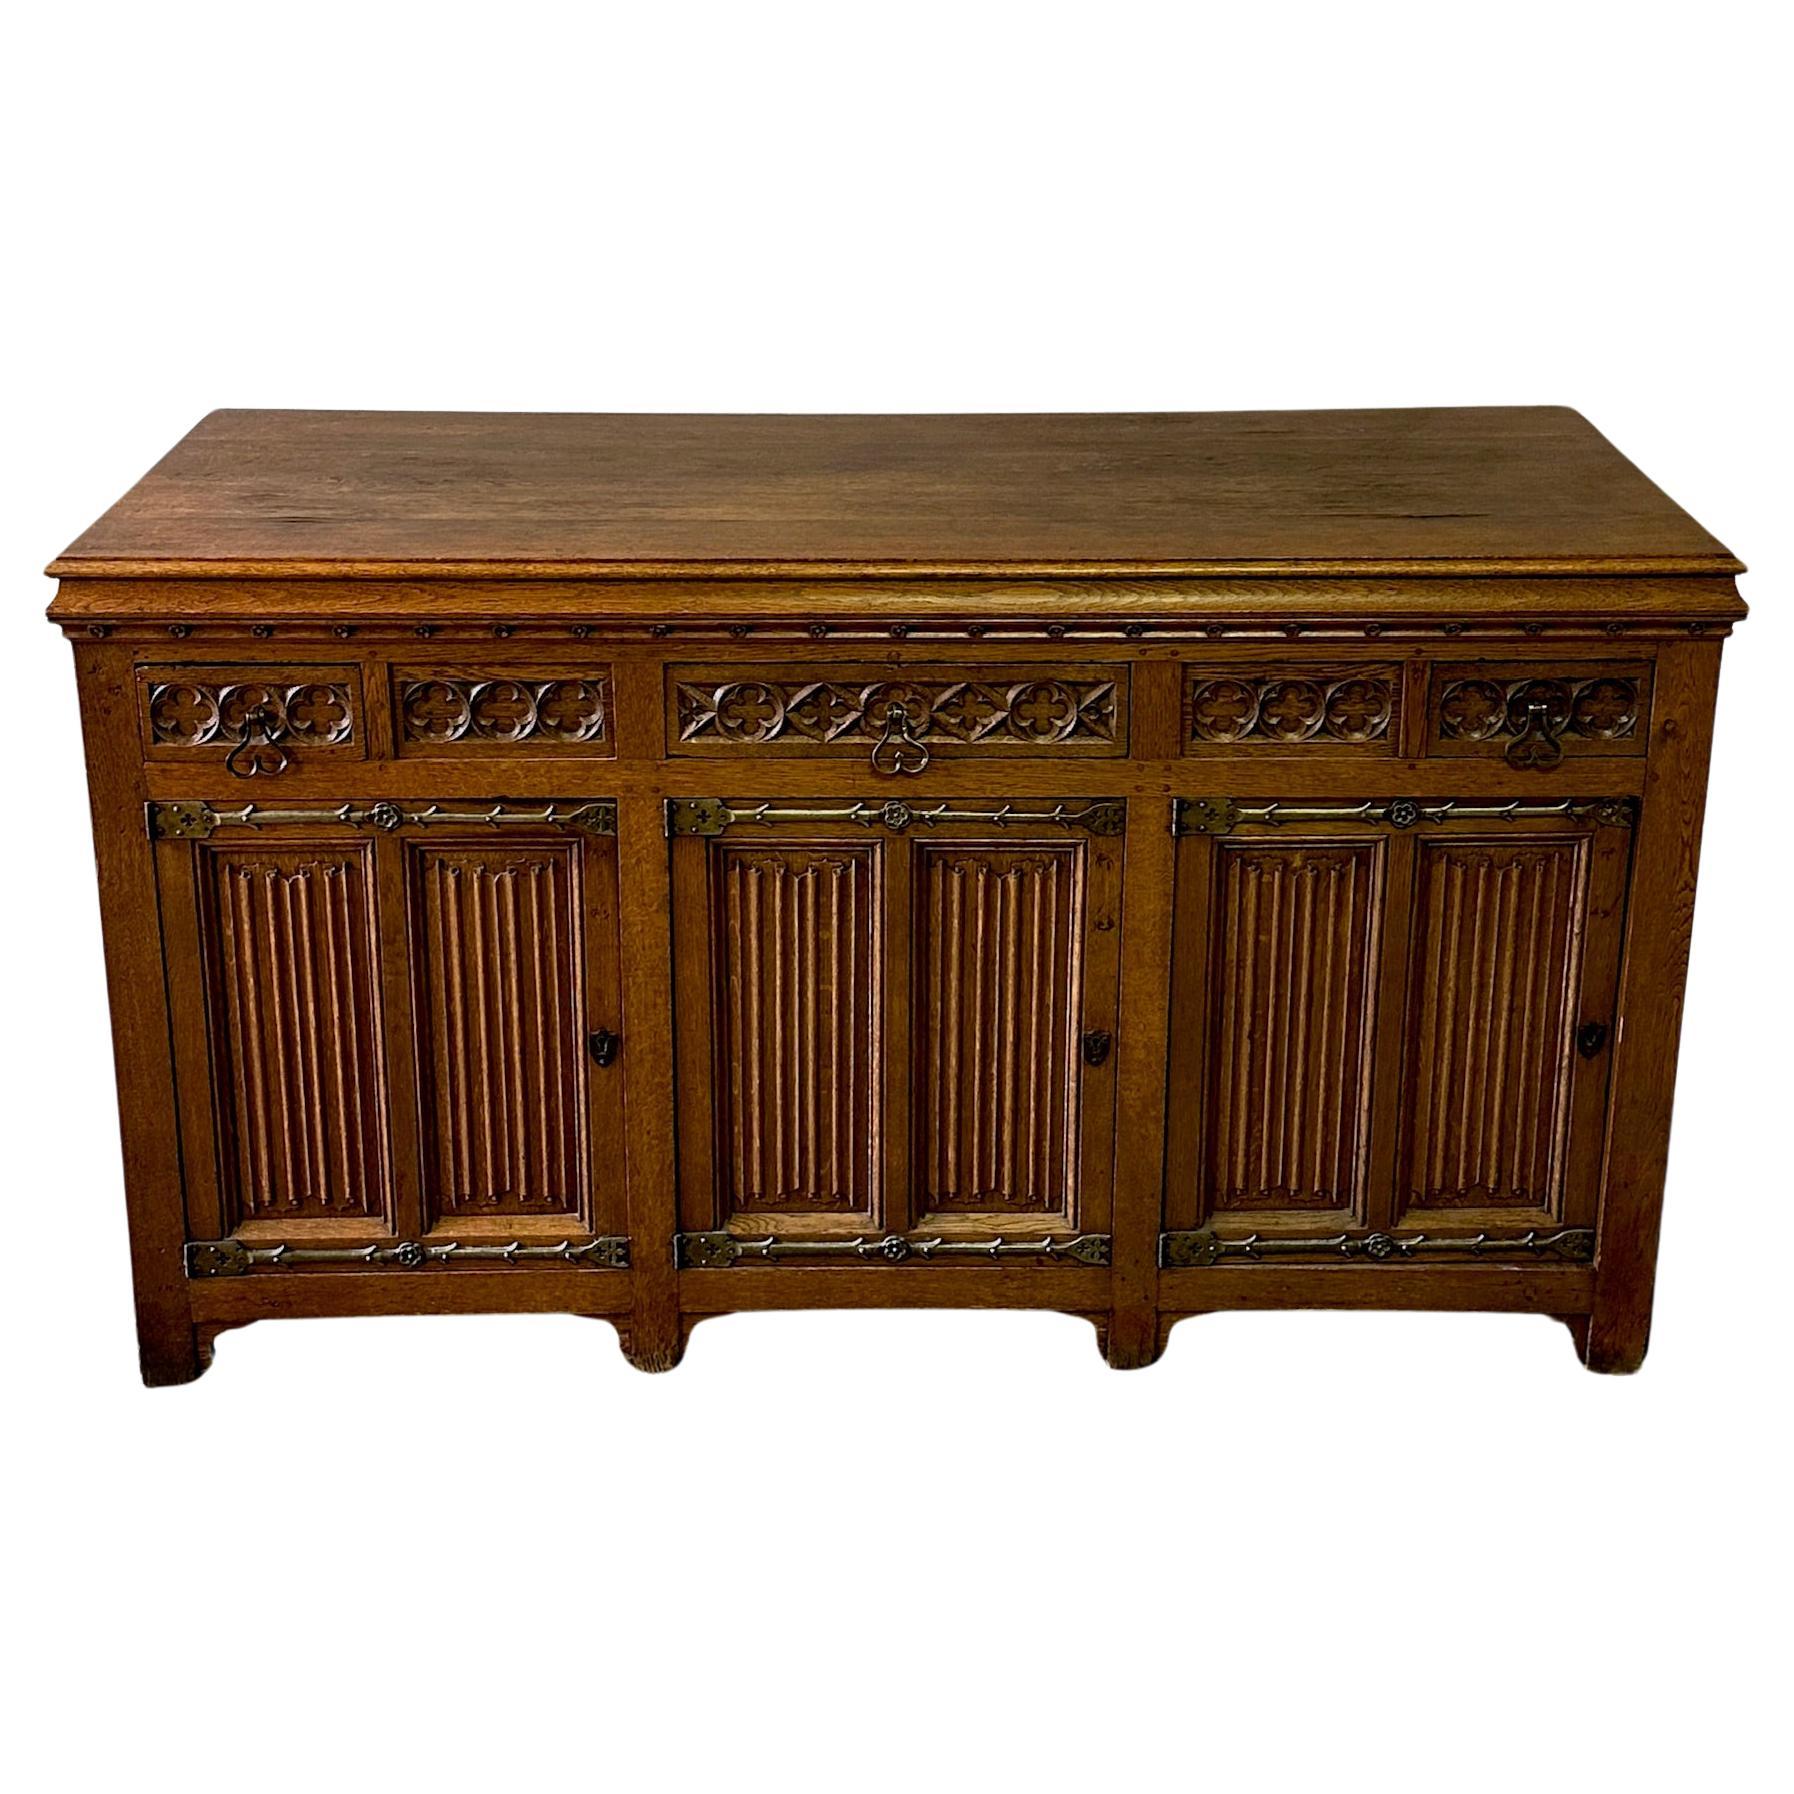 Neo Gothic Sideboard For Sale